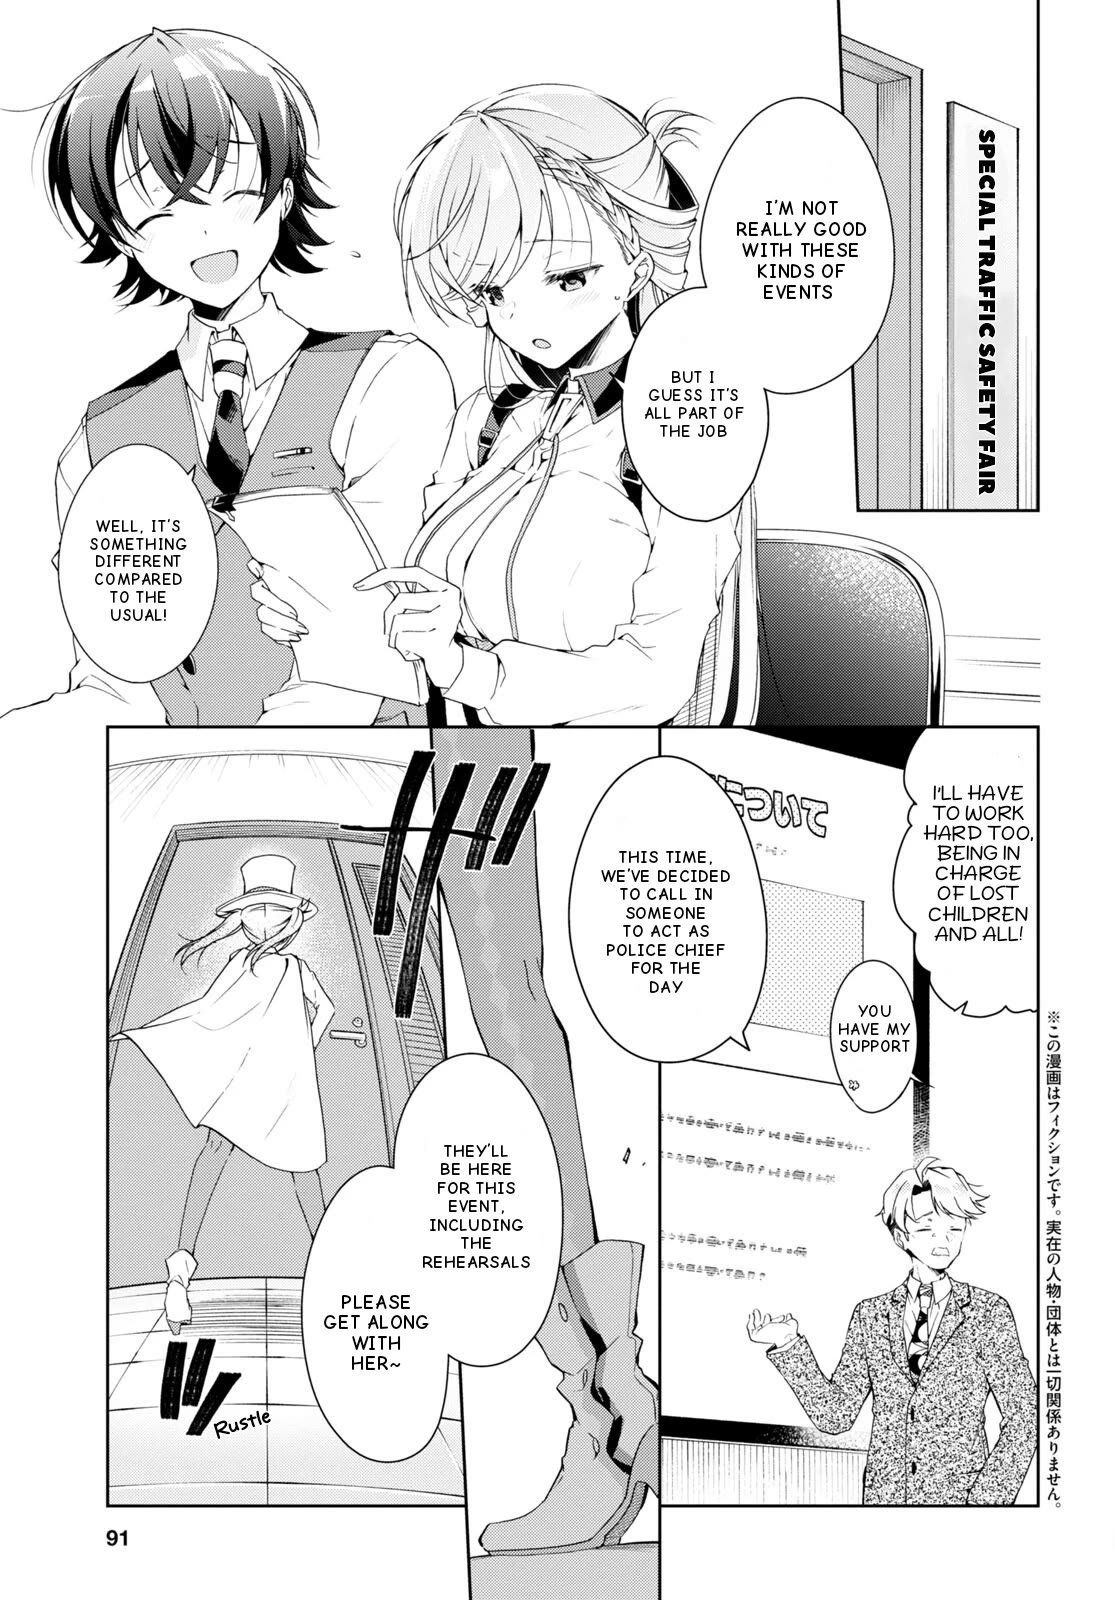 Isshiki-san Wants to Know About Love. - chapter 31 - #4